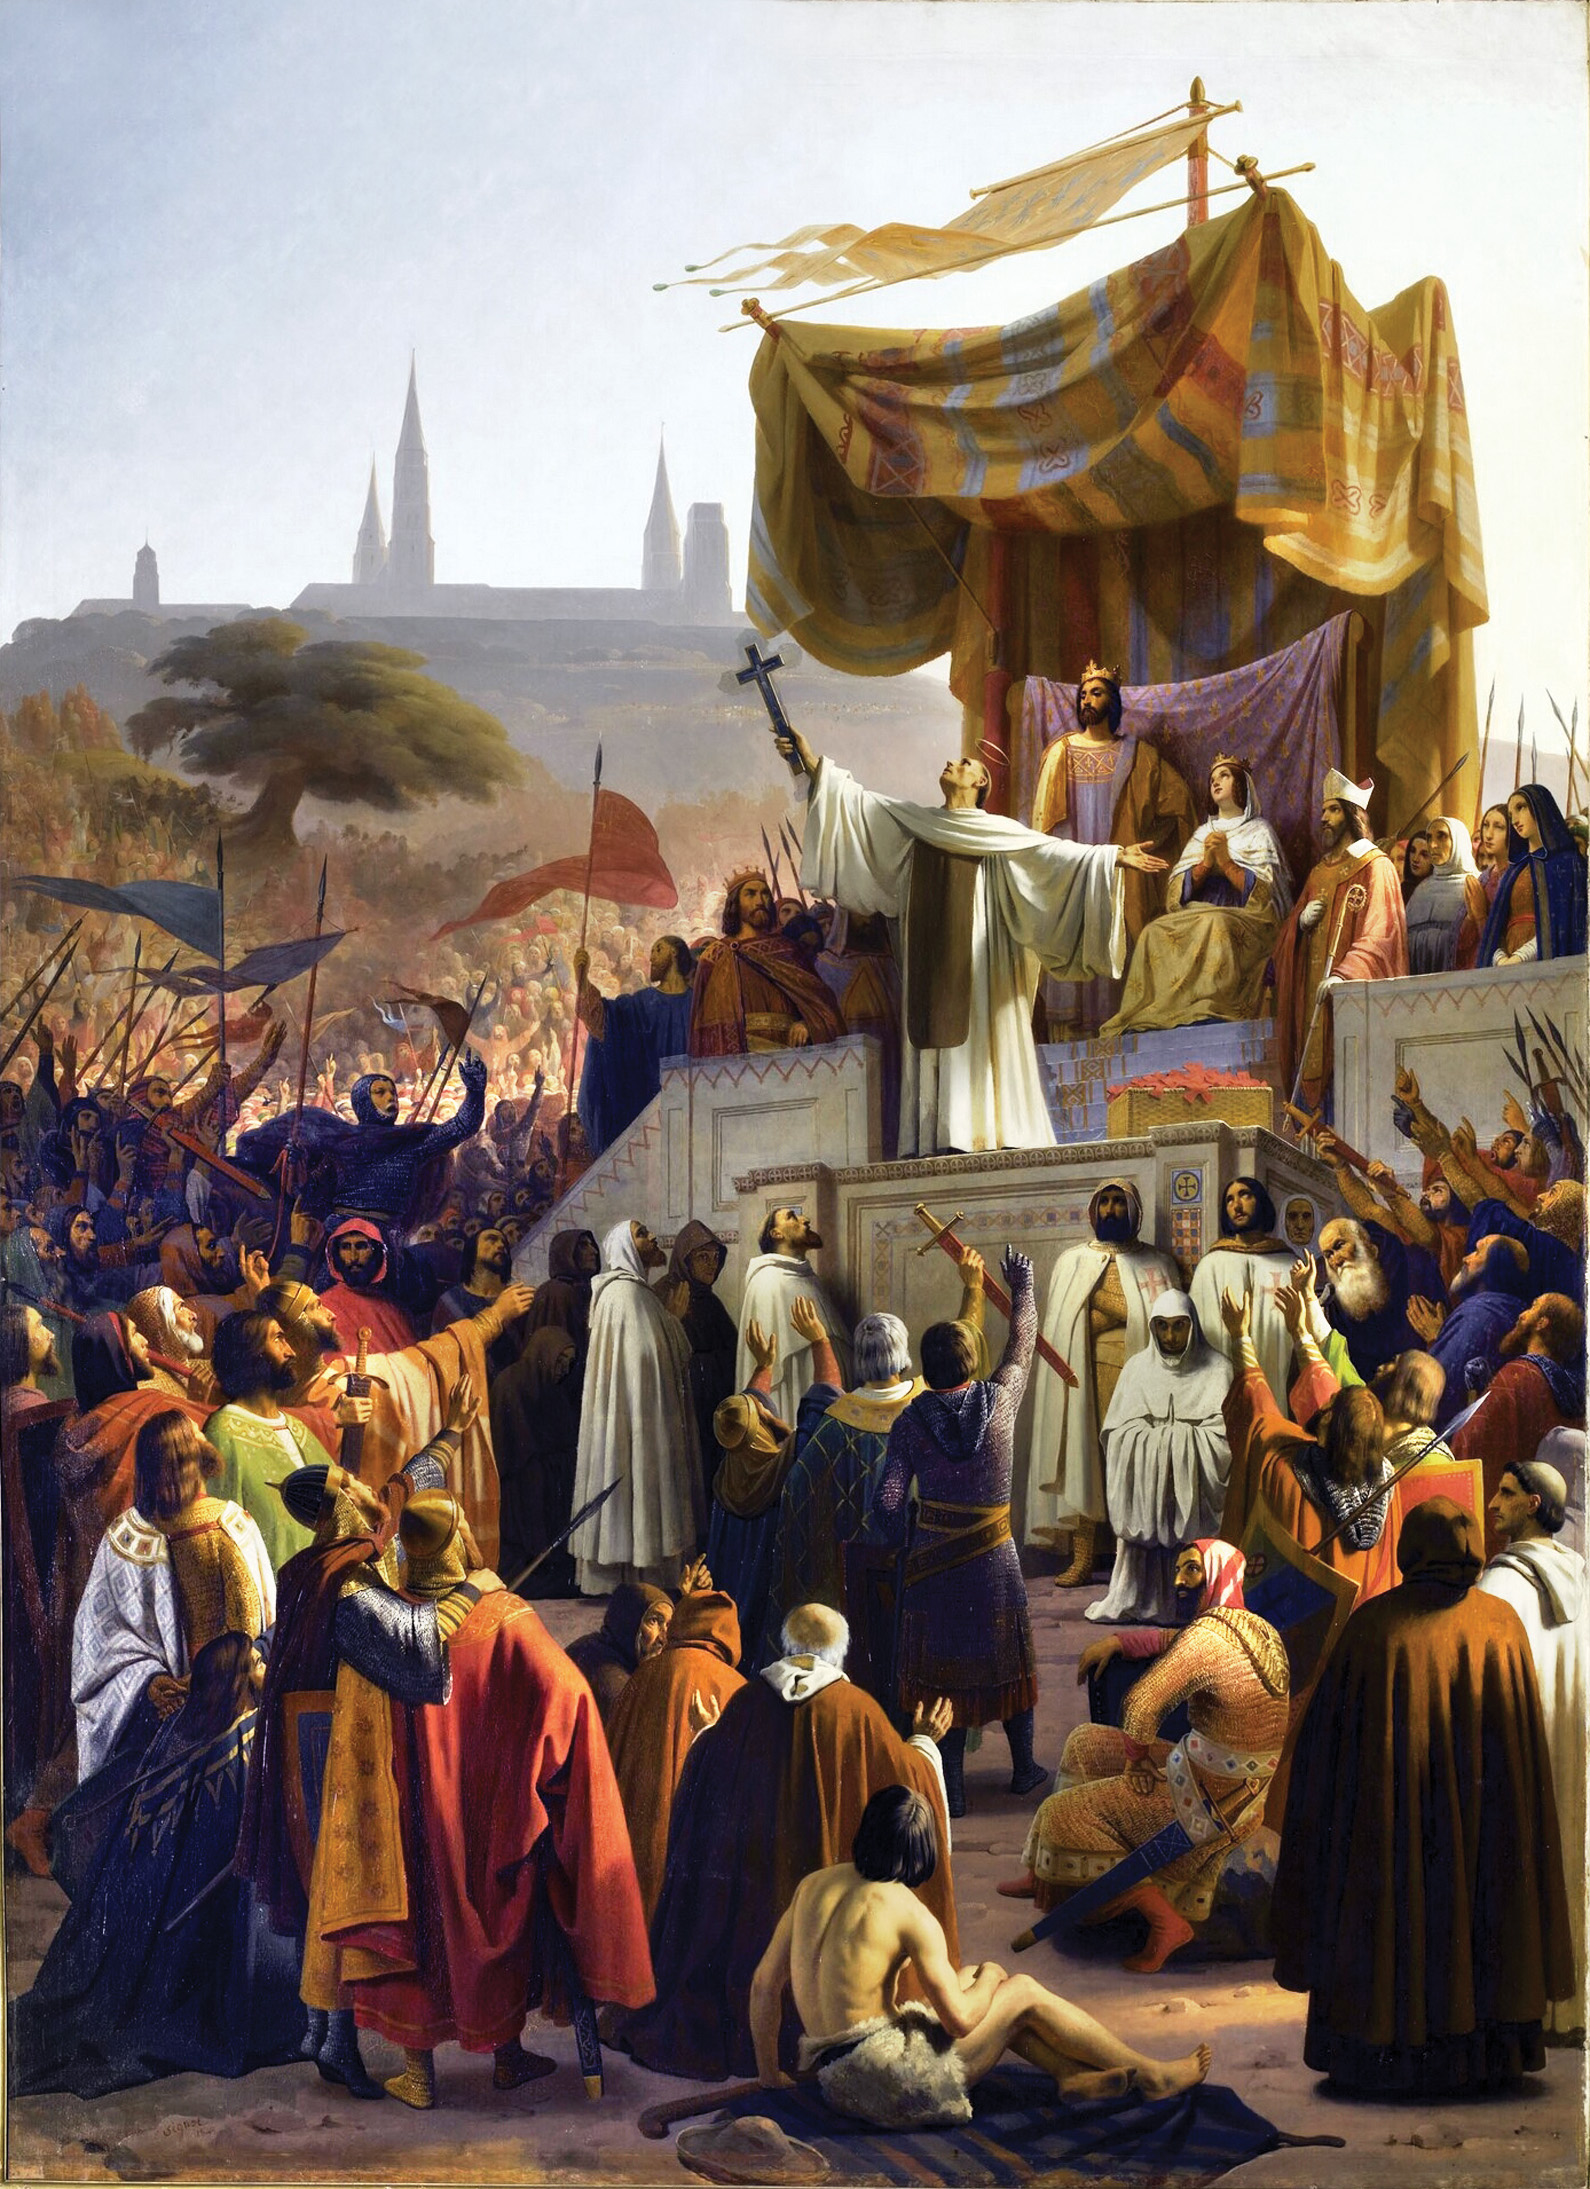 Abbot Bernard of Clairvaux preached the new crusade in a grueling seven-month tour through France, the Low Countries, and Germany. 